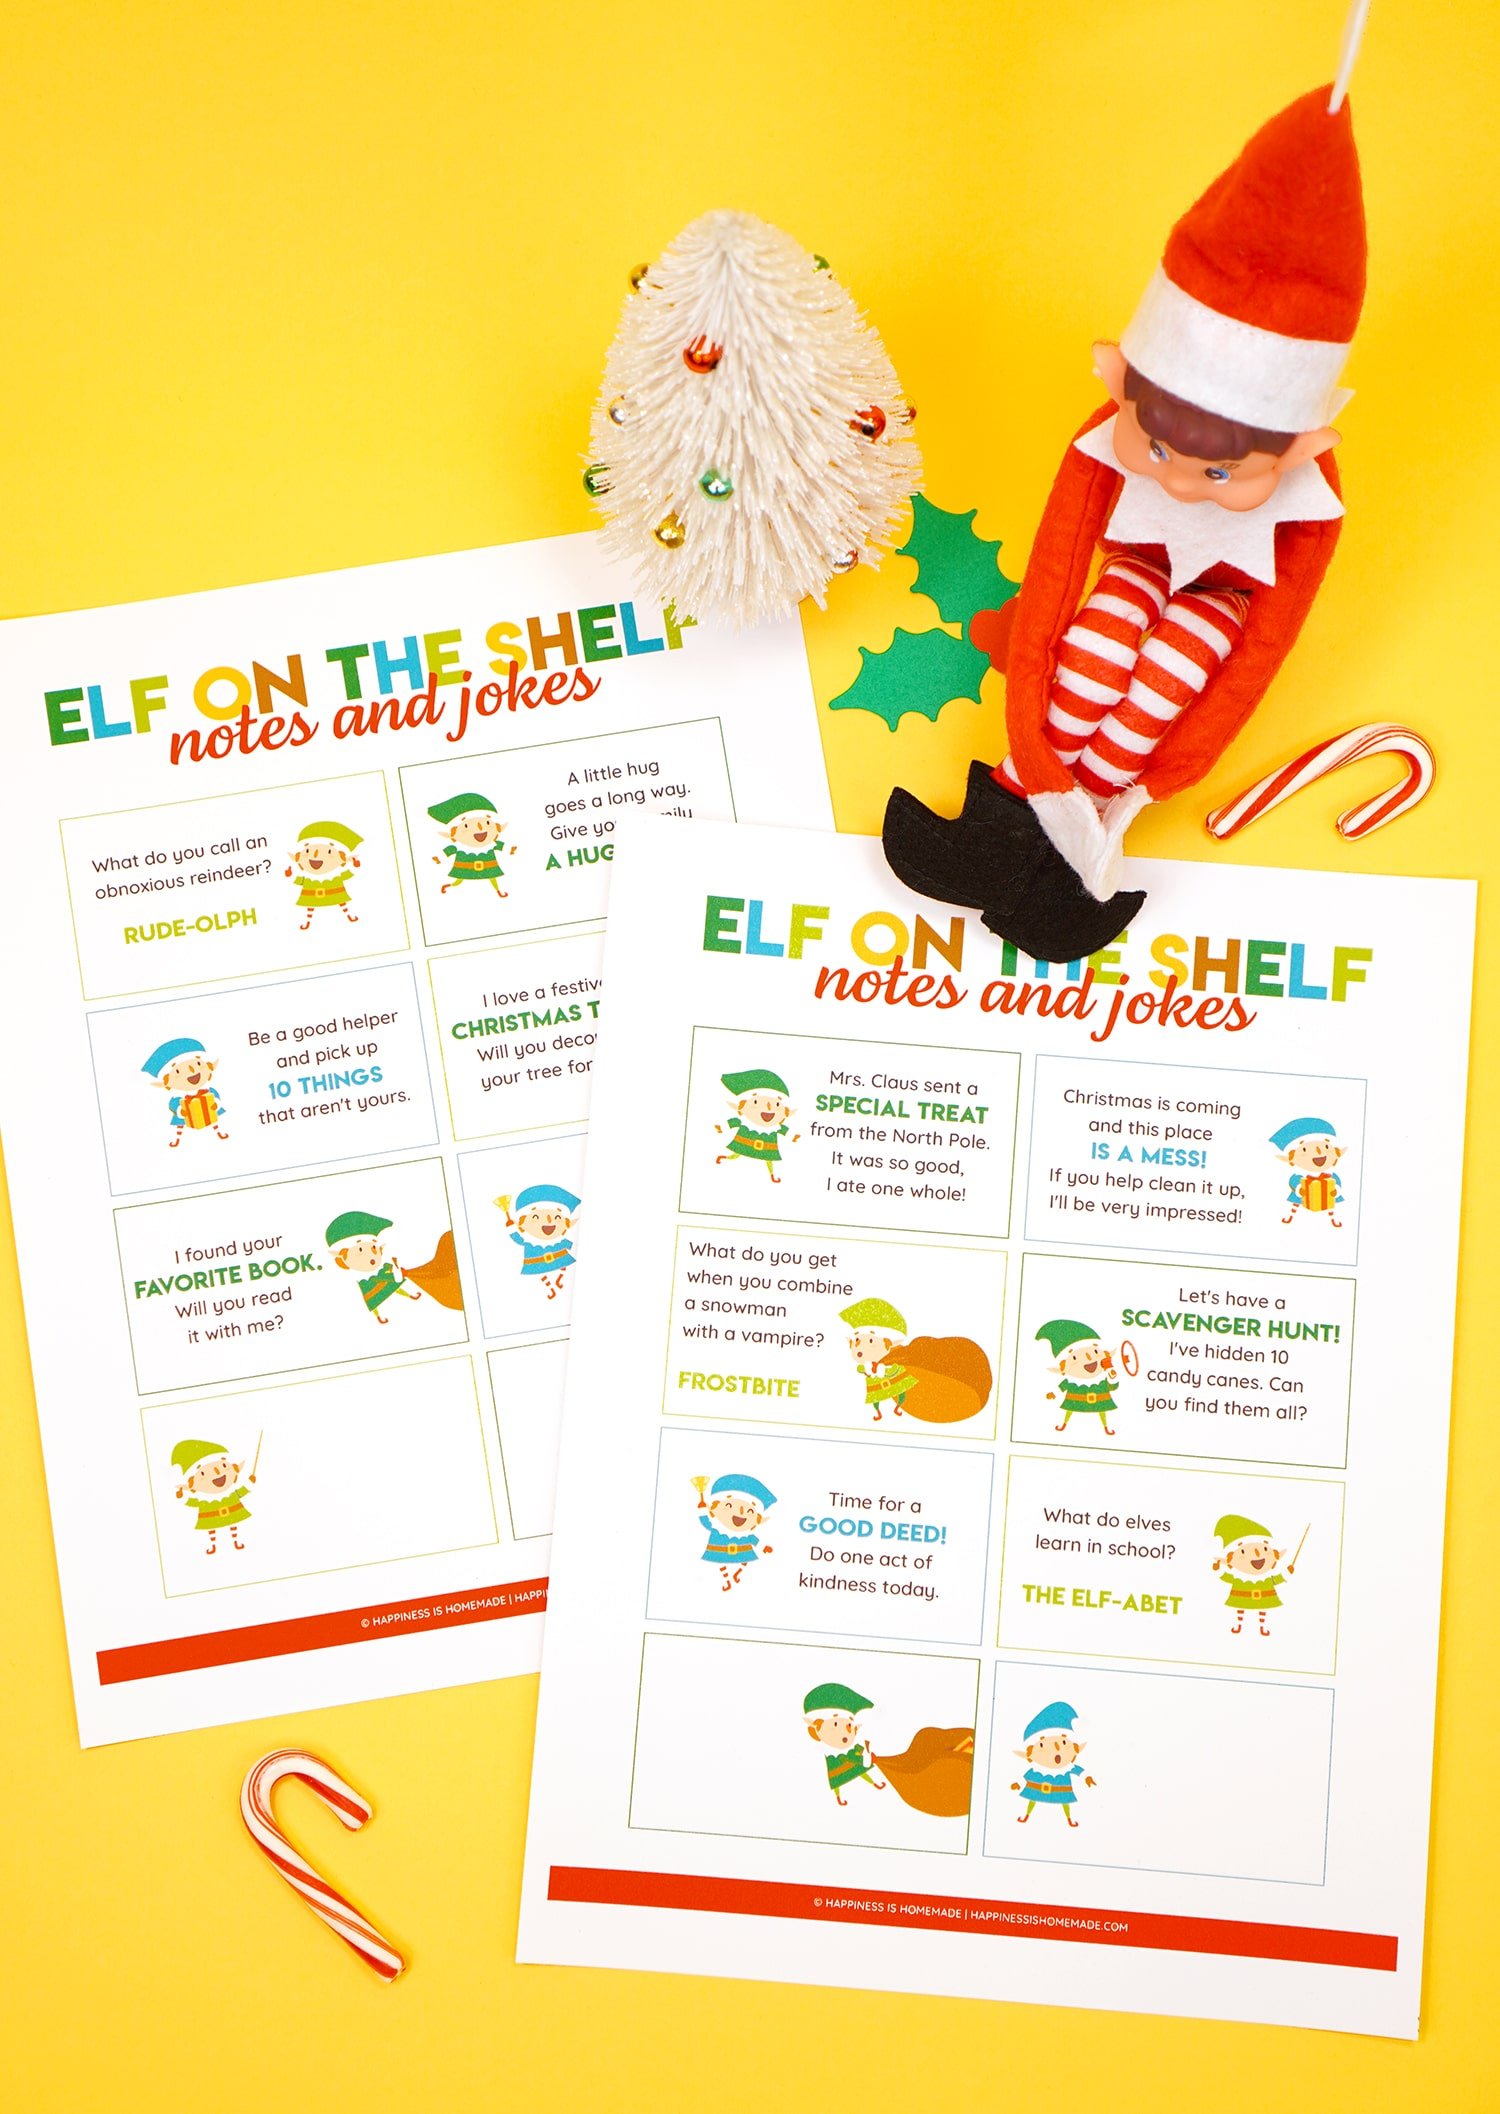 Elf doll on a yellow background with printed Elf on the Shelf note and joke card printable sheets around him and candy canes and Christmas decorations in the background.